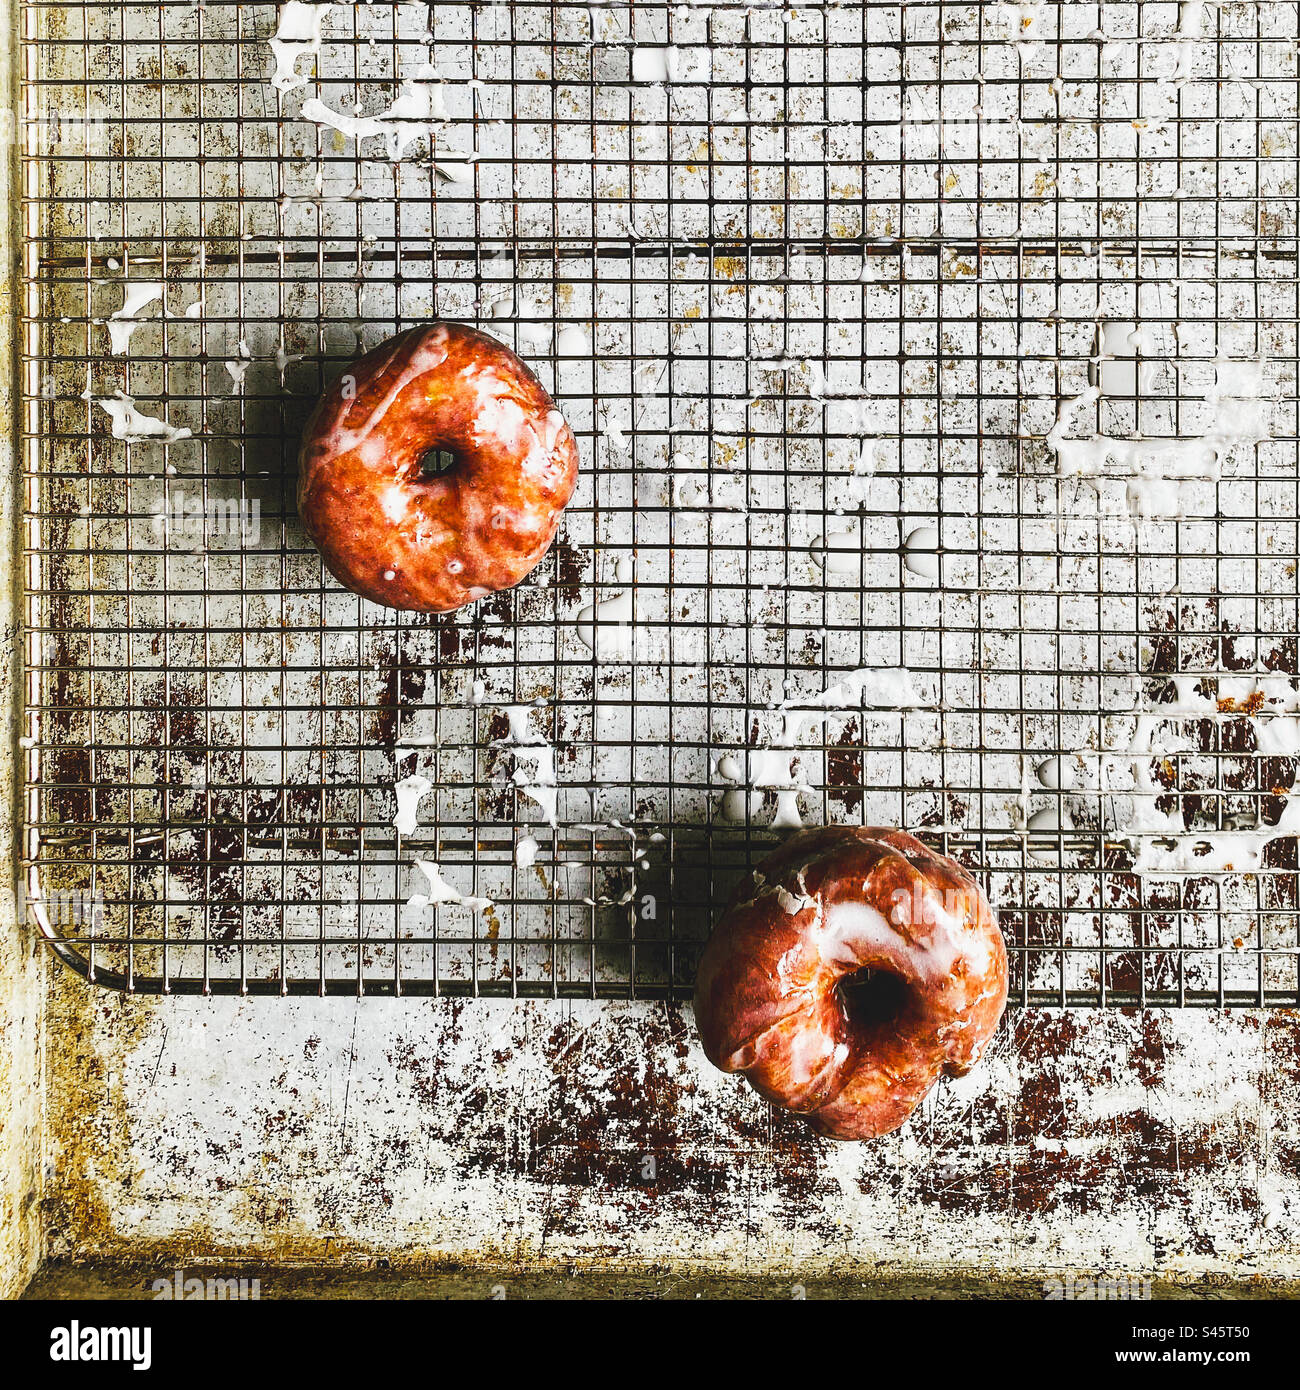 Fresh glazed donuts cooling on a wire rack. Stock Photo